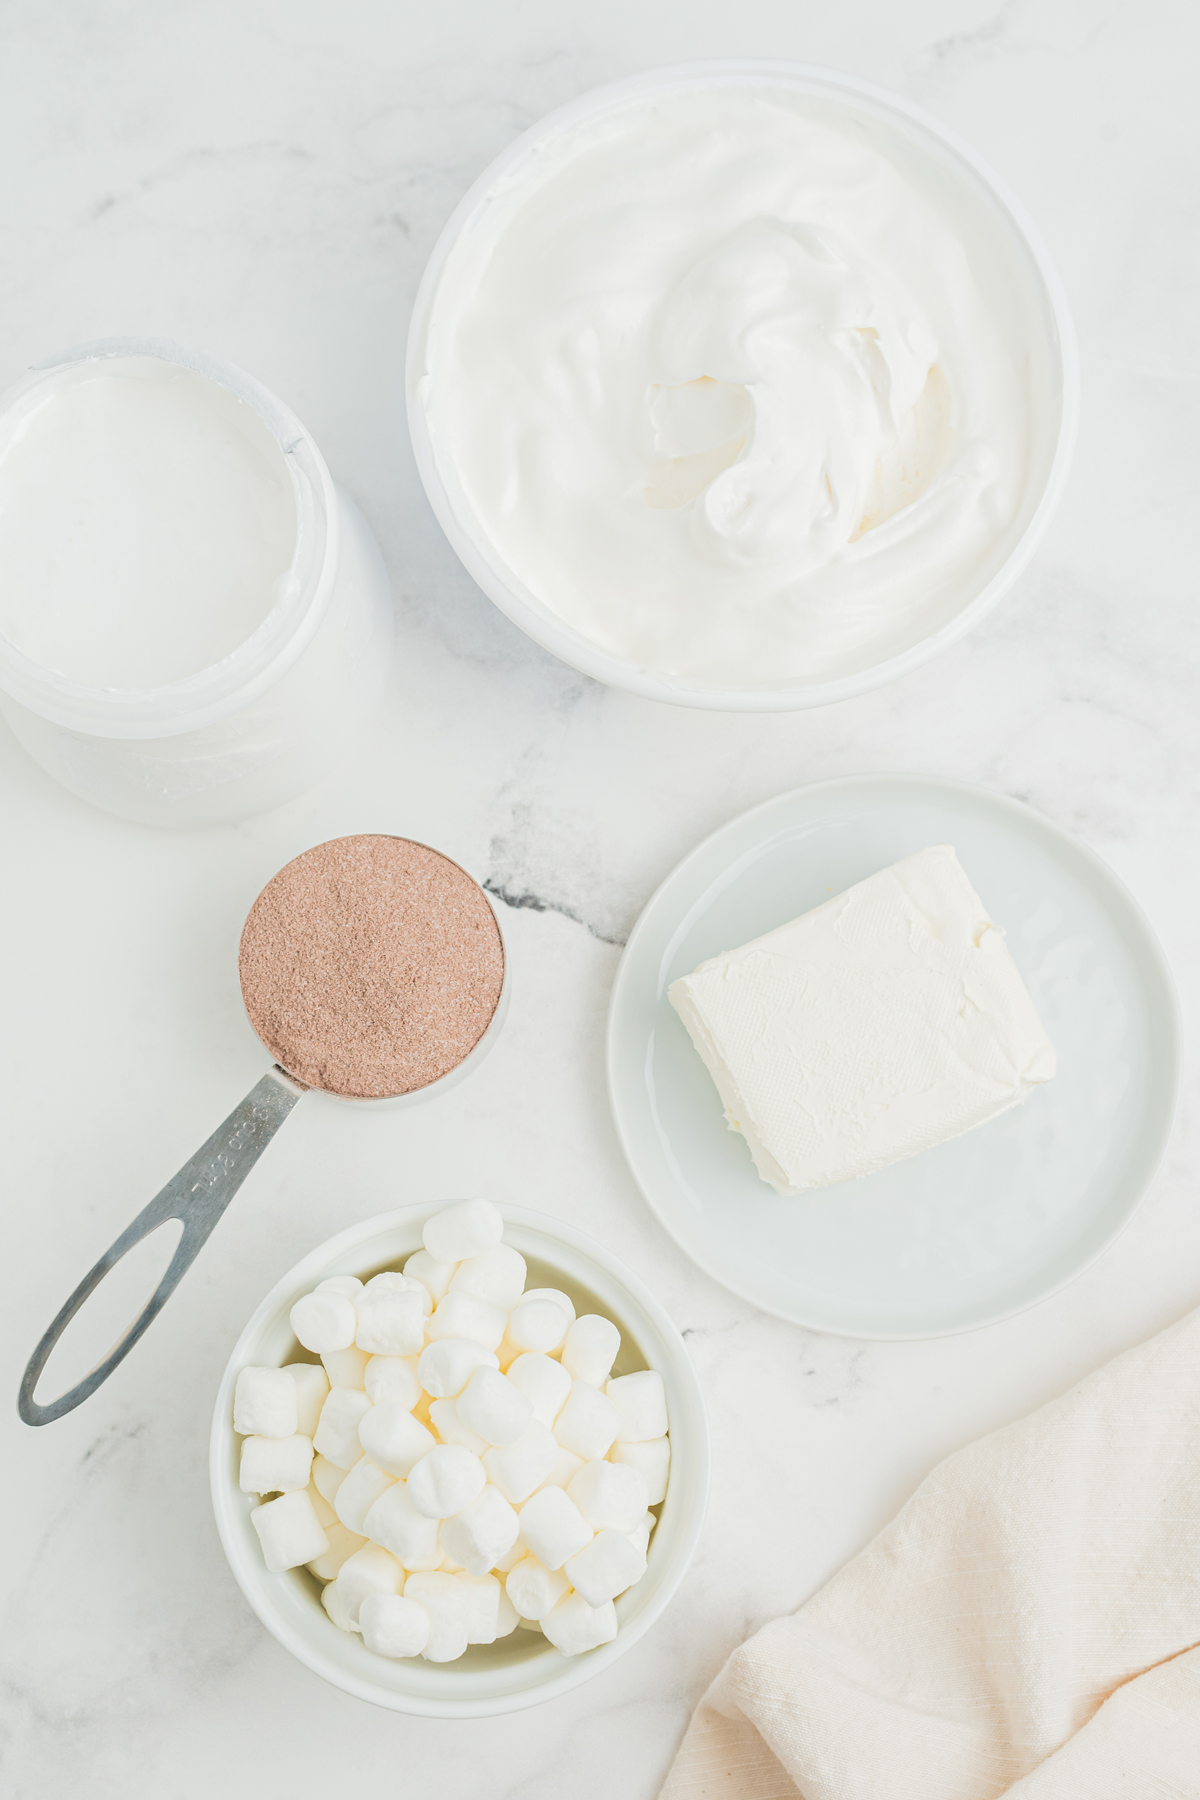 Hot chocolate dip Ingredients on a white counter. These are marshmallow fluff, cream cheese hot chocolate mix, whipped topping, and thawed mini marshmallows for garnish.